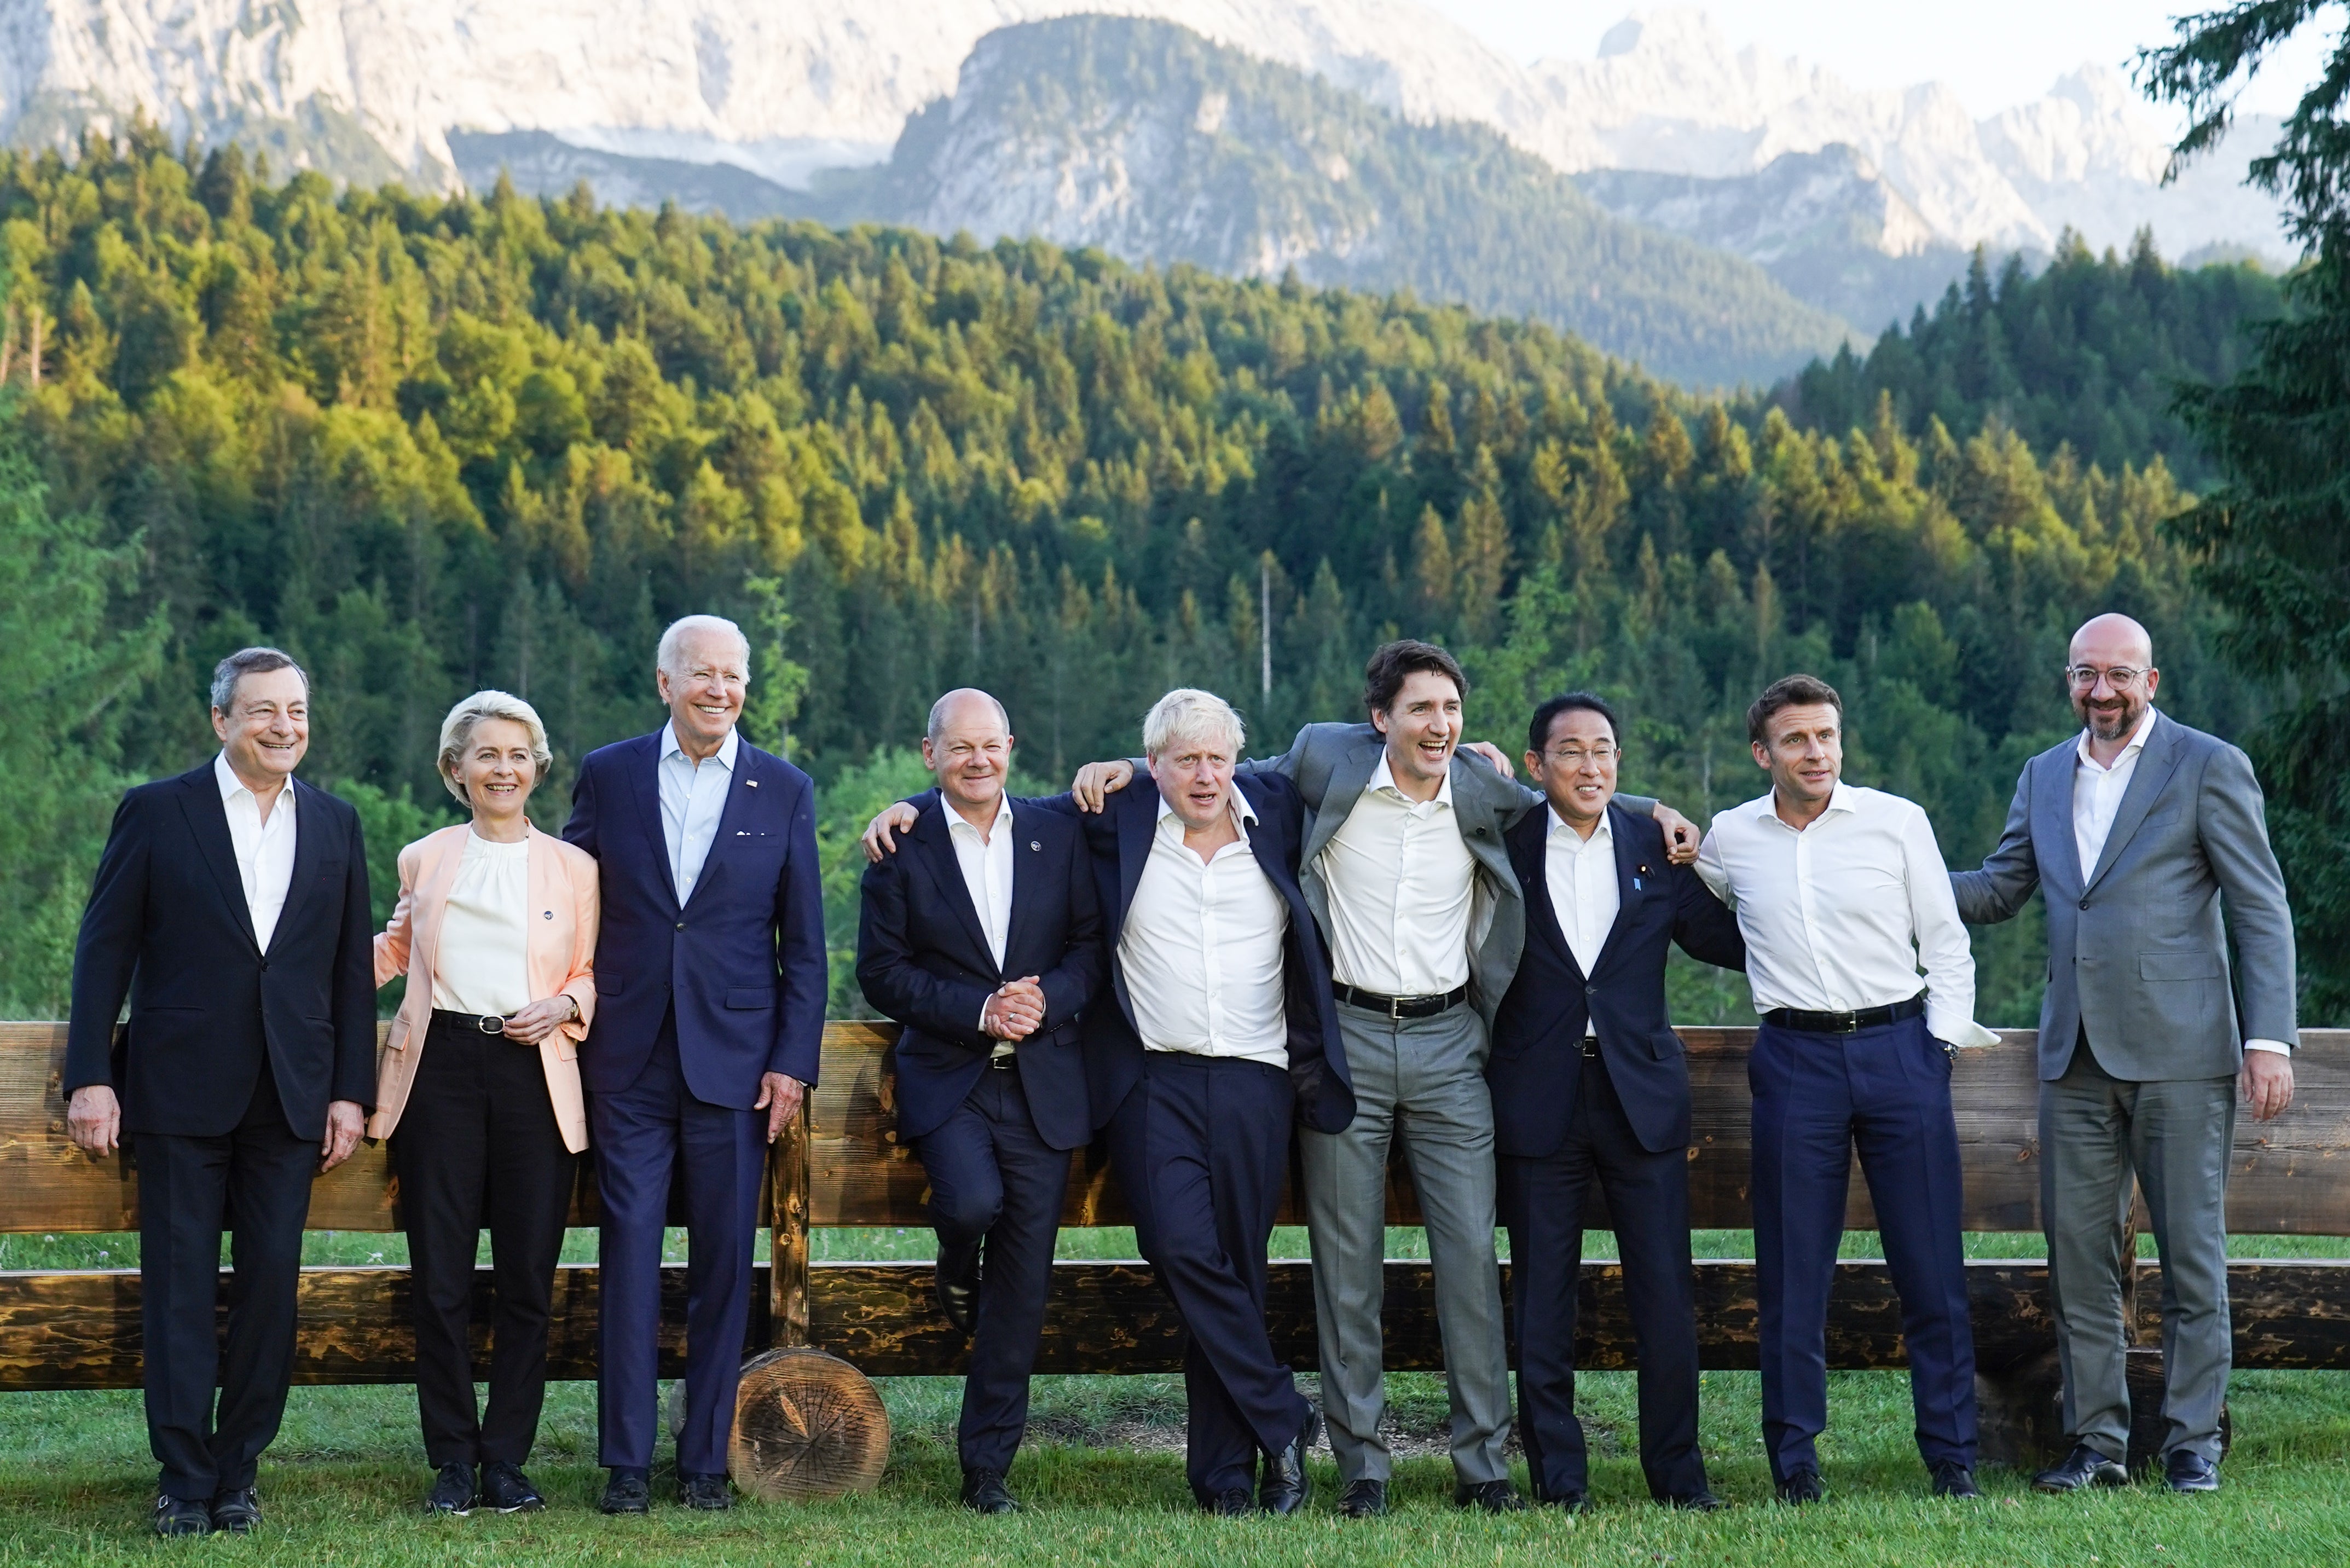 G7 leaders (left to right) Prime Minister of Italy Mario Draghi, European Union Commission President Ursula von der Leyen, US President Joe Biden, German Chancellor Olaf Scholz, Prime Minister Boris Johnson, Prime Minister of Canada Justin Trudeau, Prime Minister of Japan Fumio Kishida, President of France Emmanuel Macron, and European Union Council President Charles Michel, pose for an informal family photo following their working session dinner during the G7 summit in Schloss Elmau, in the Bavarian Alps, Germany. Picture date: Sunday June 26, 2022.